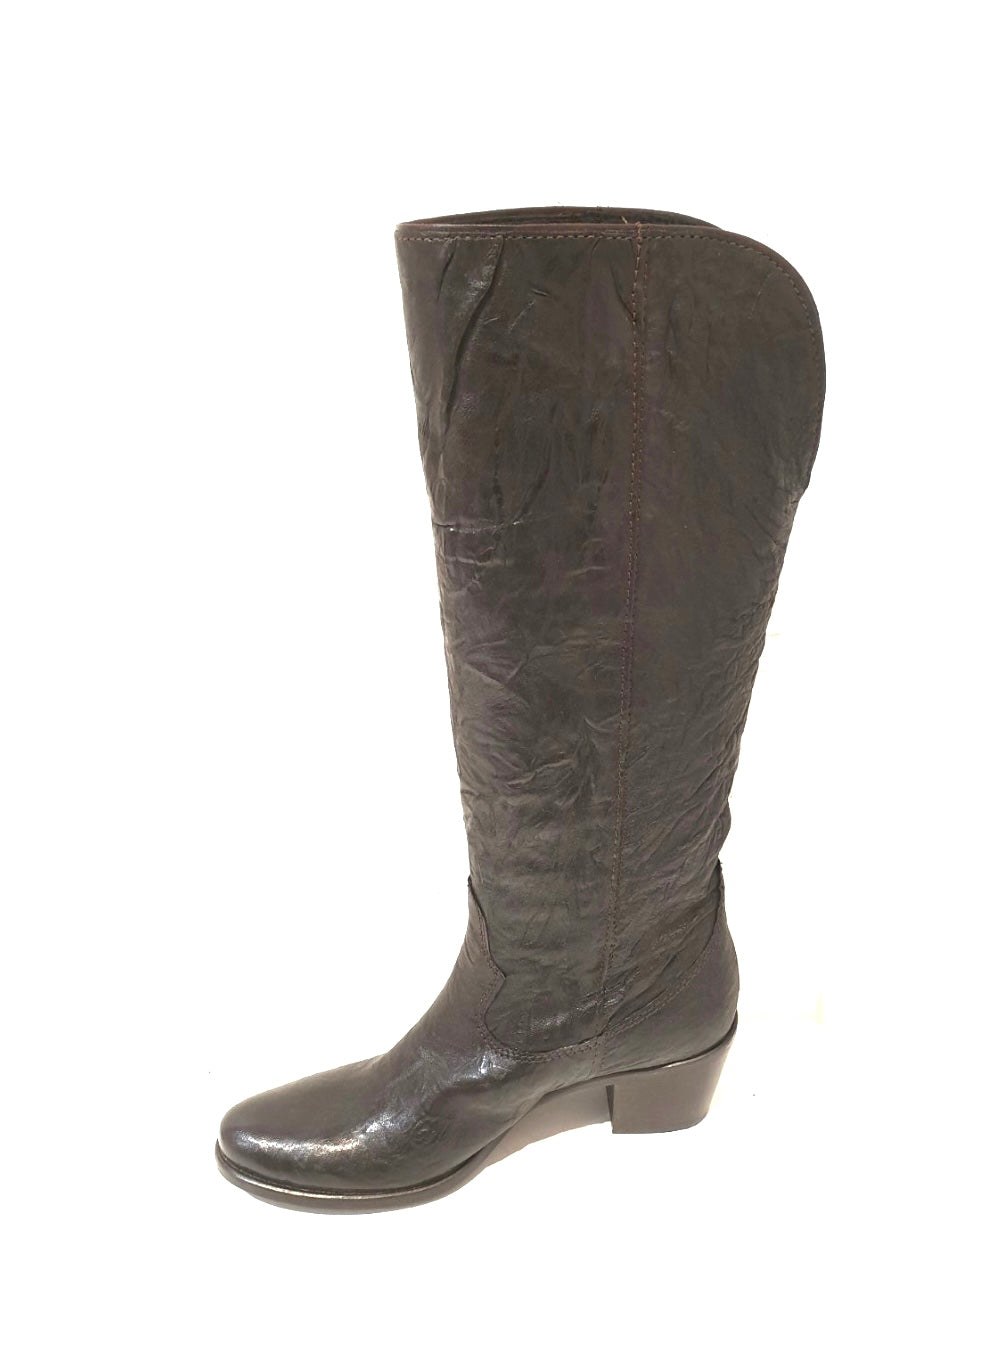 Progetto 9809 T Moro Lacro Dark Brown Crinkle Leather Knee High Boot Made In Italy